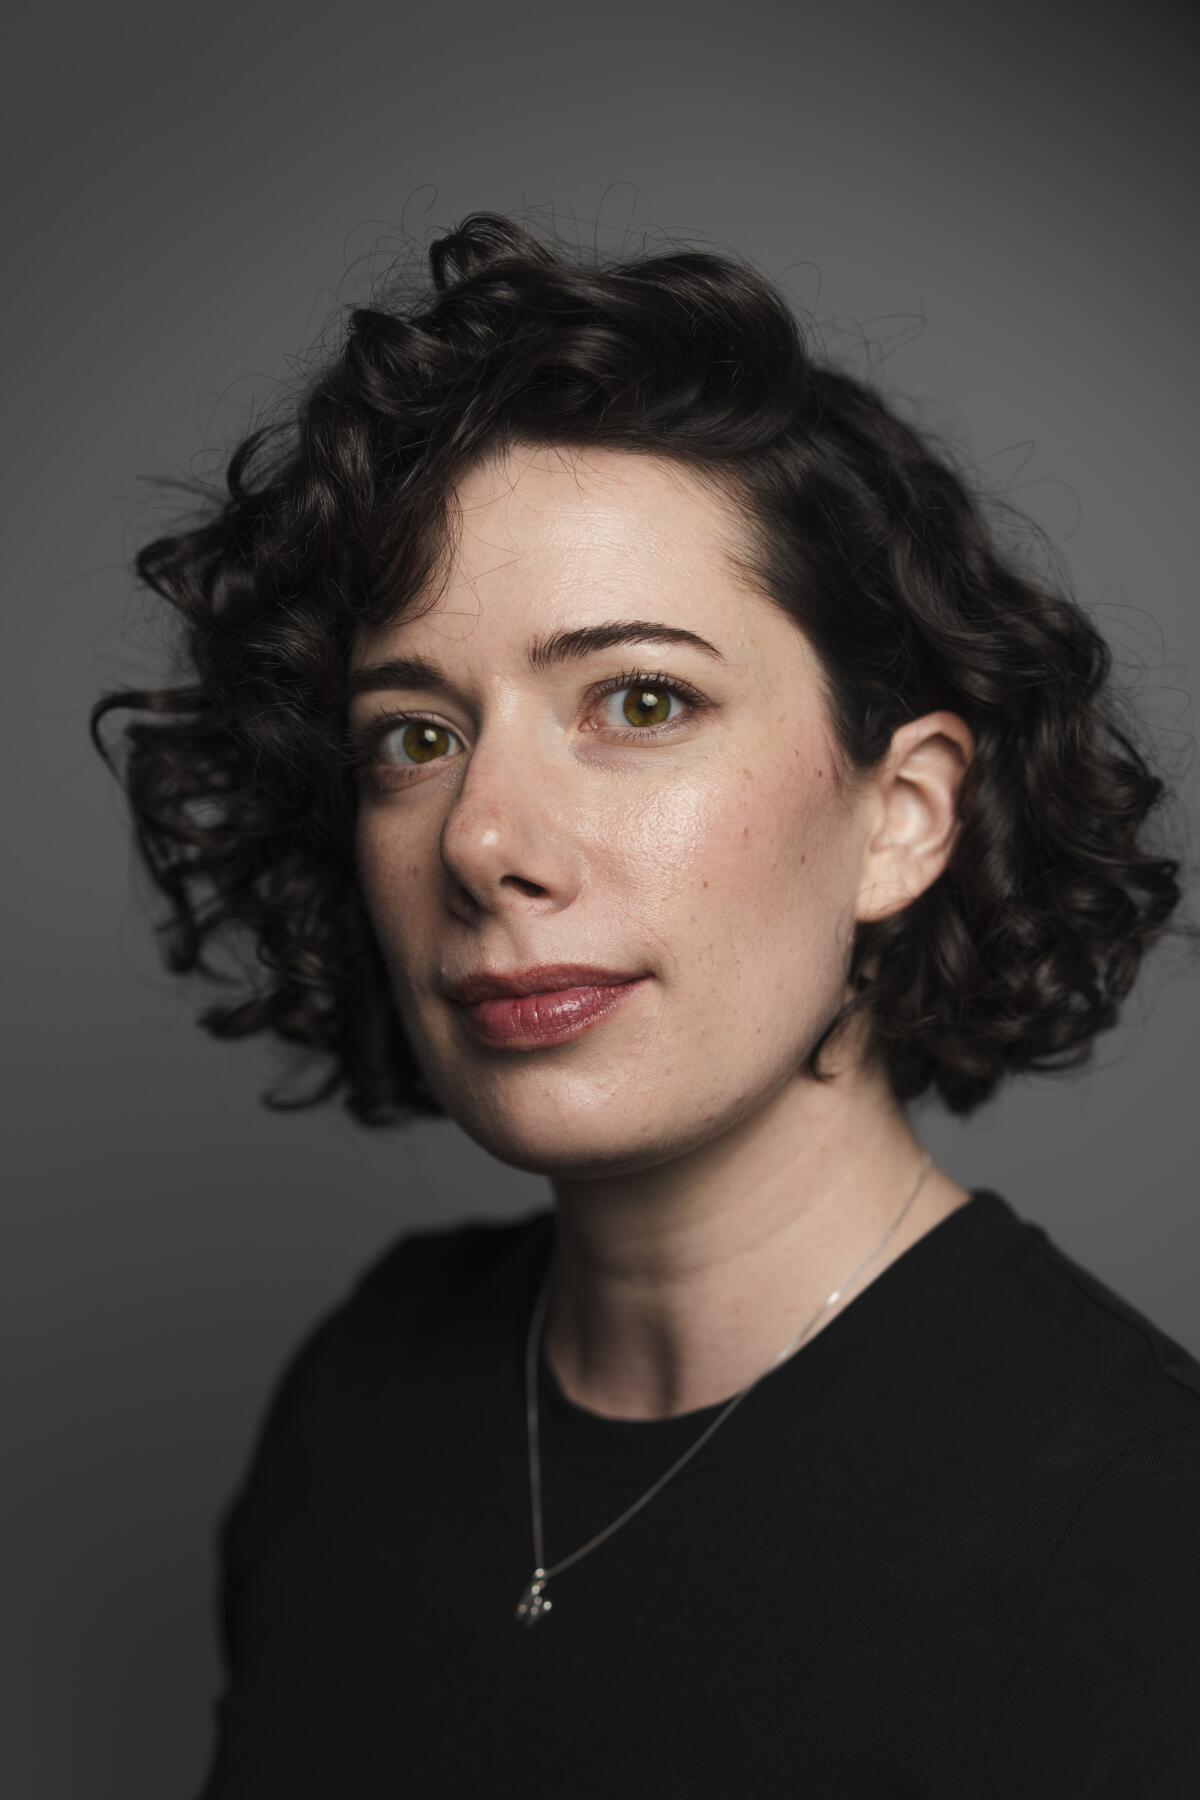 A woman with dark curly hair in a black shirt